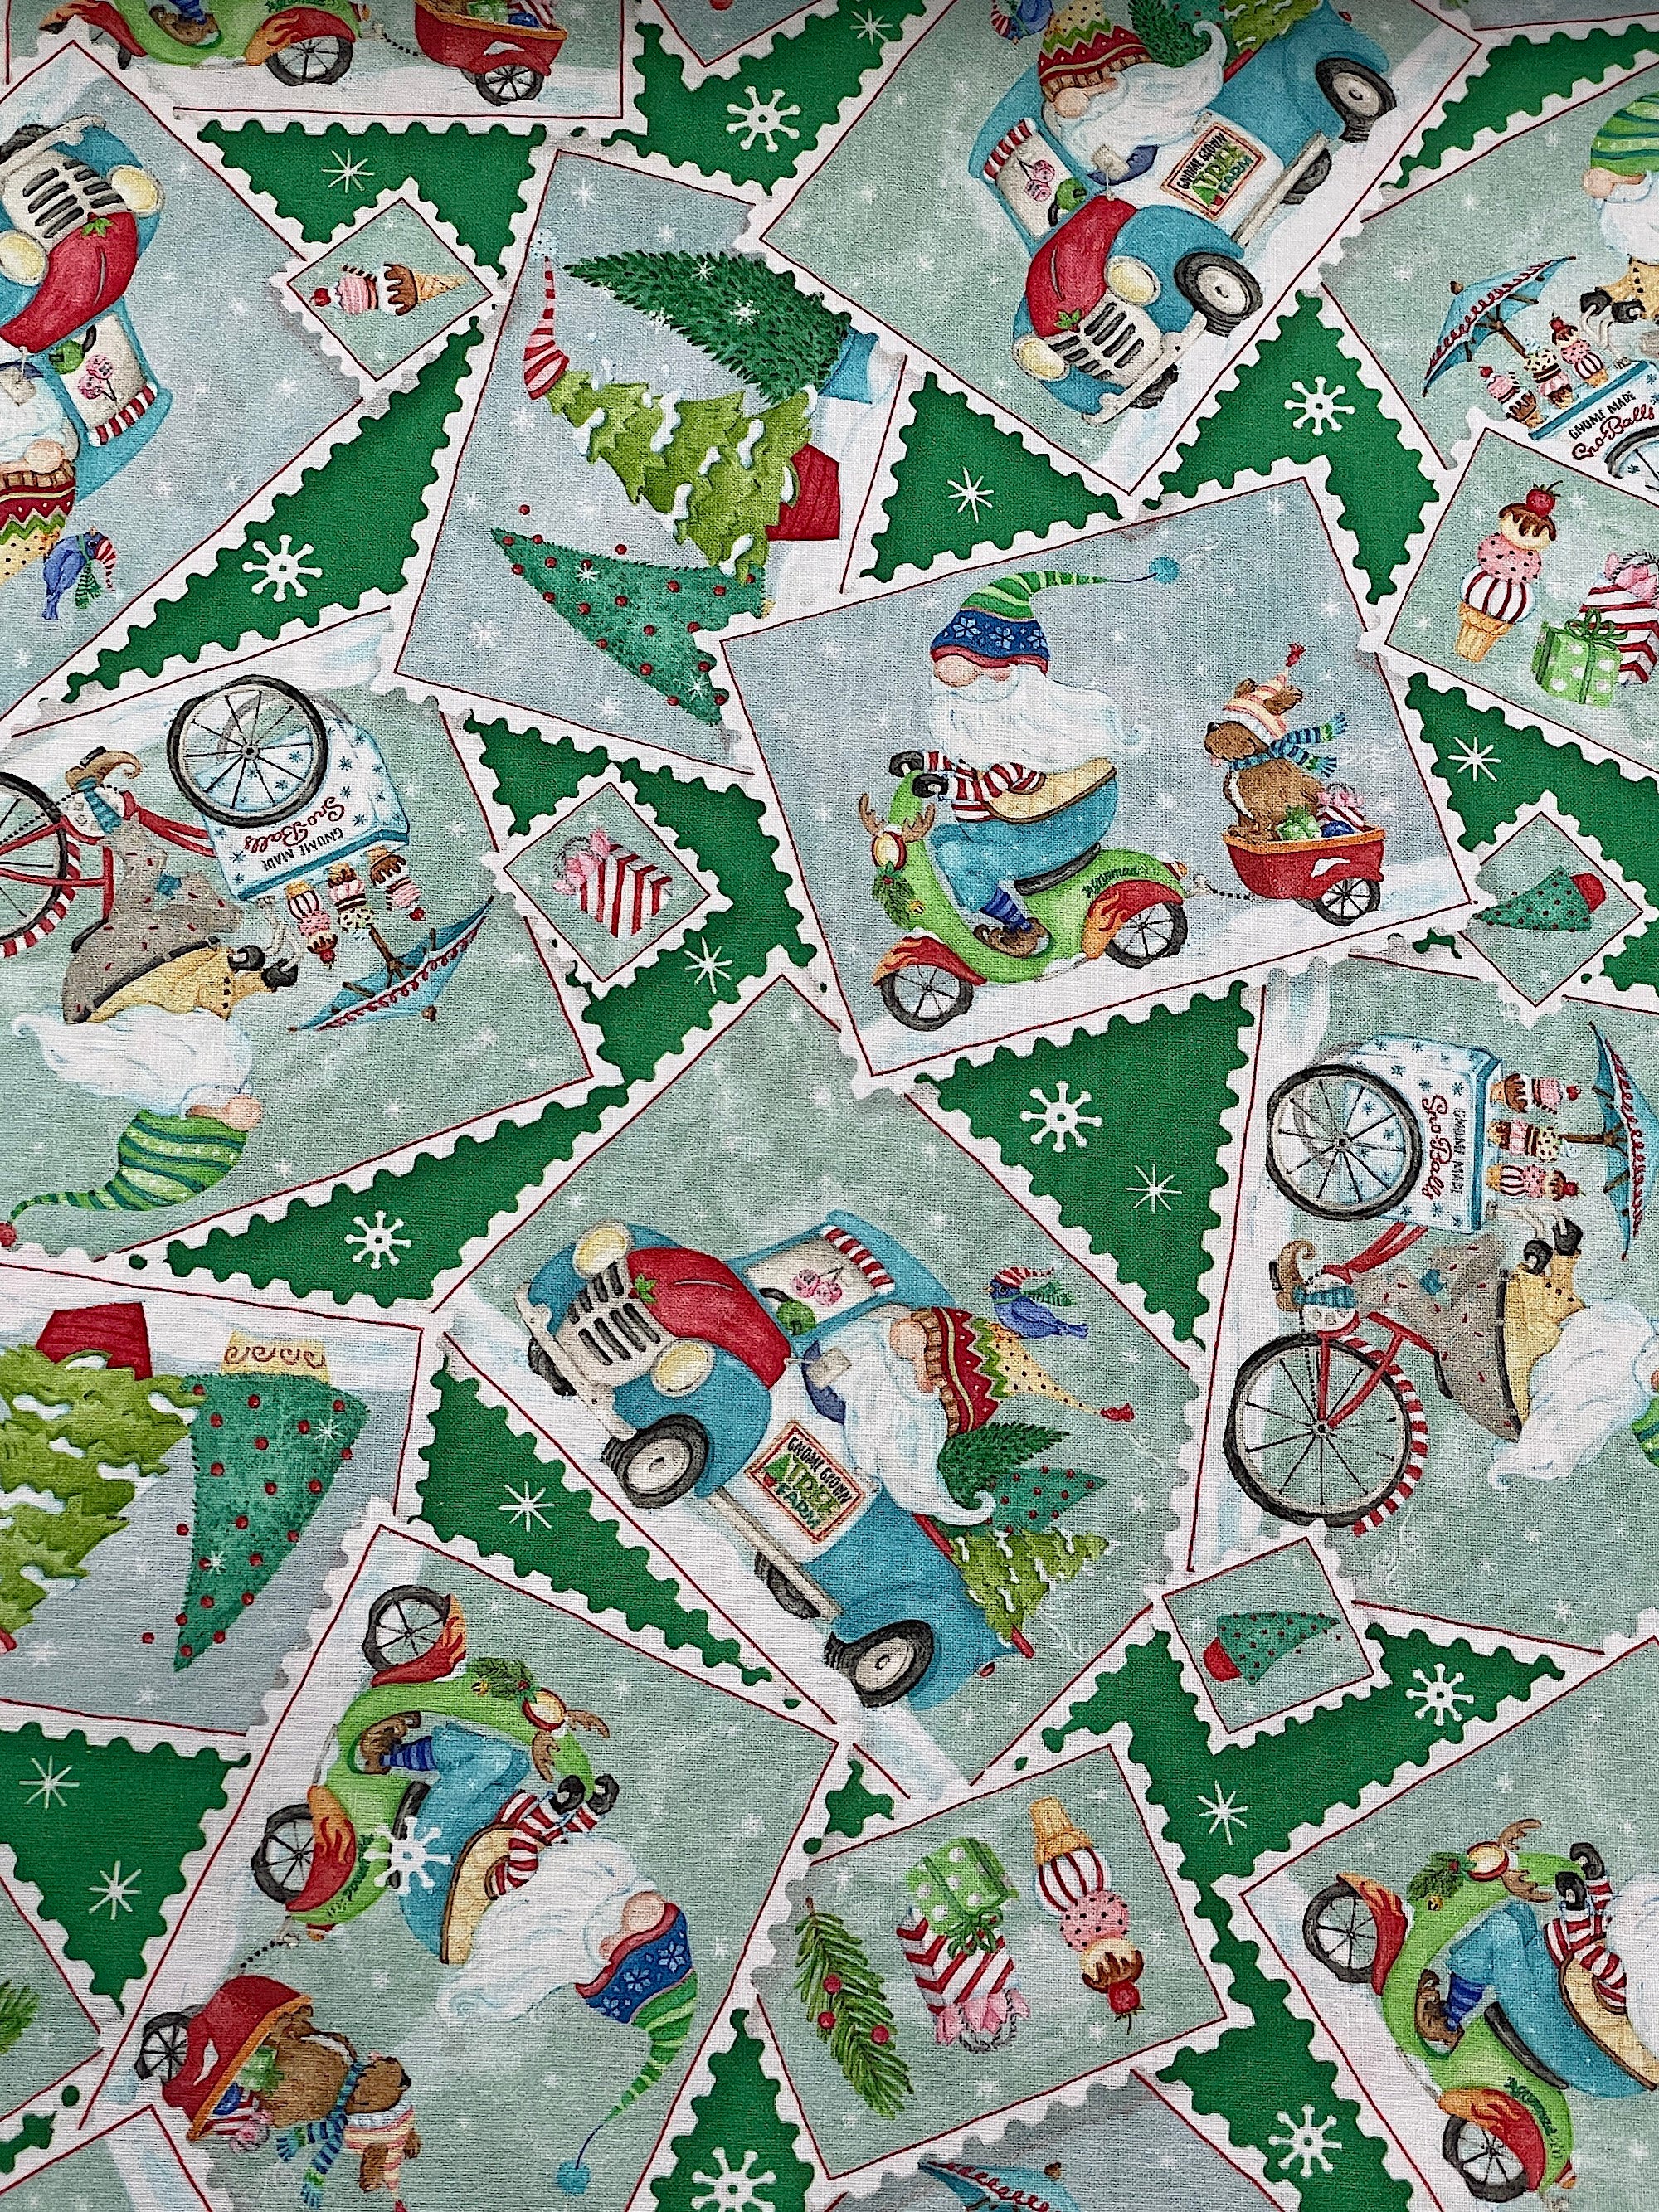 This fabric is part of the Wheeling Winter Wonderland collection by Robin Roderick. This green fabric is covered with postcards. the postcards have Santa gnomes, trees, trucks, bicycles, presents and more.